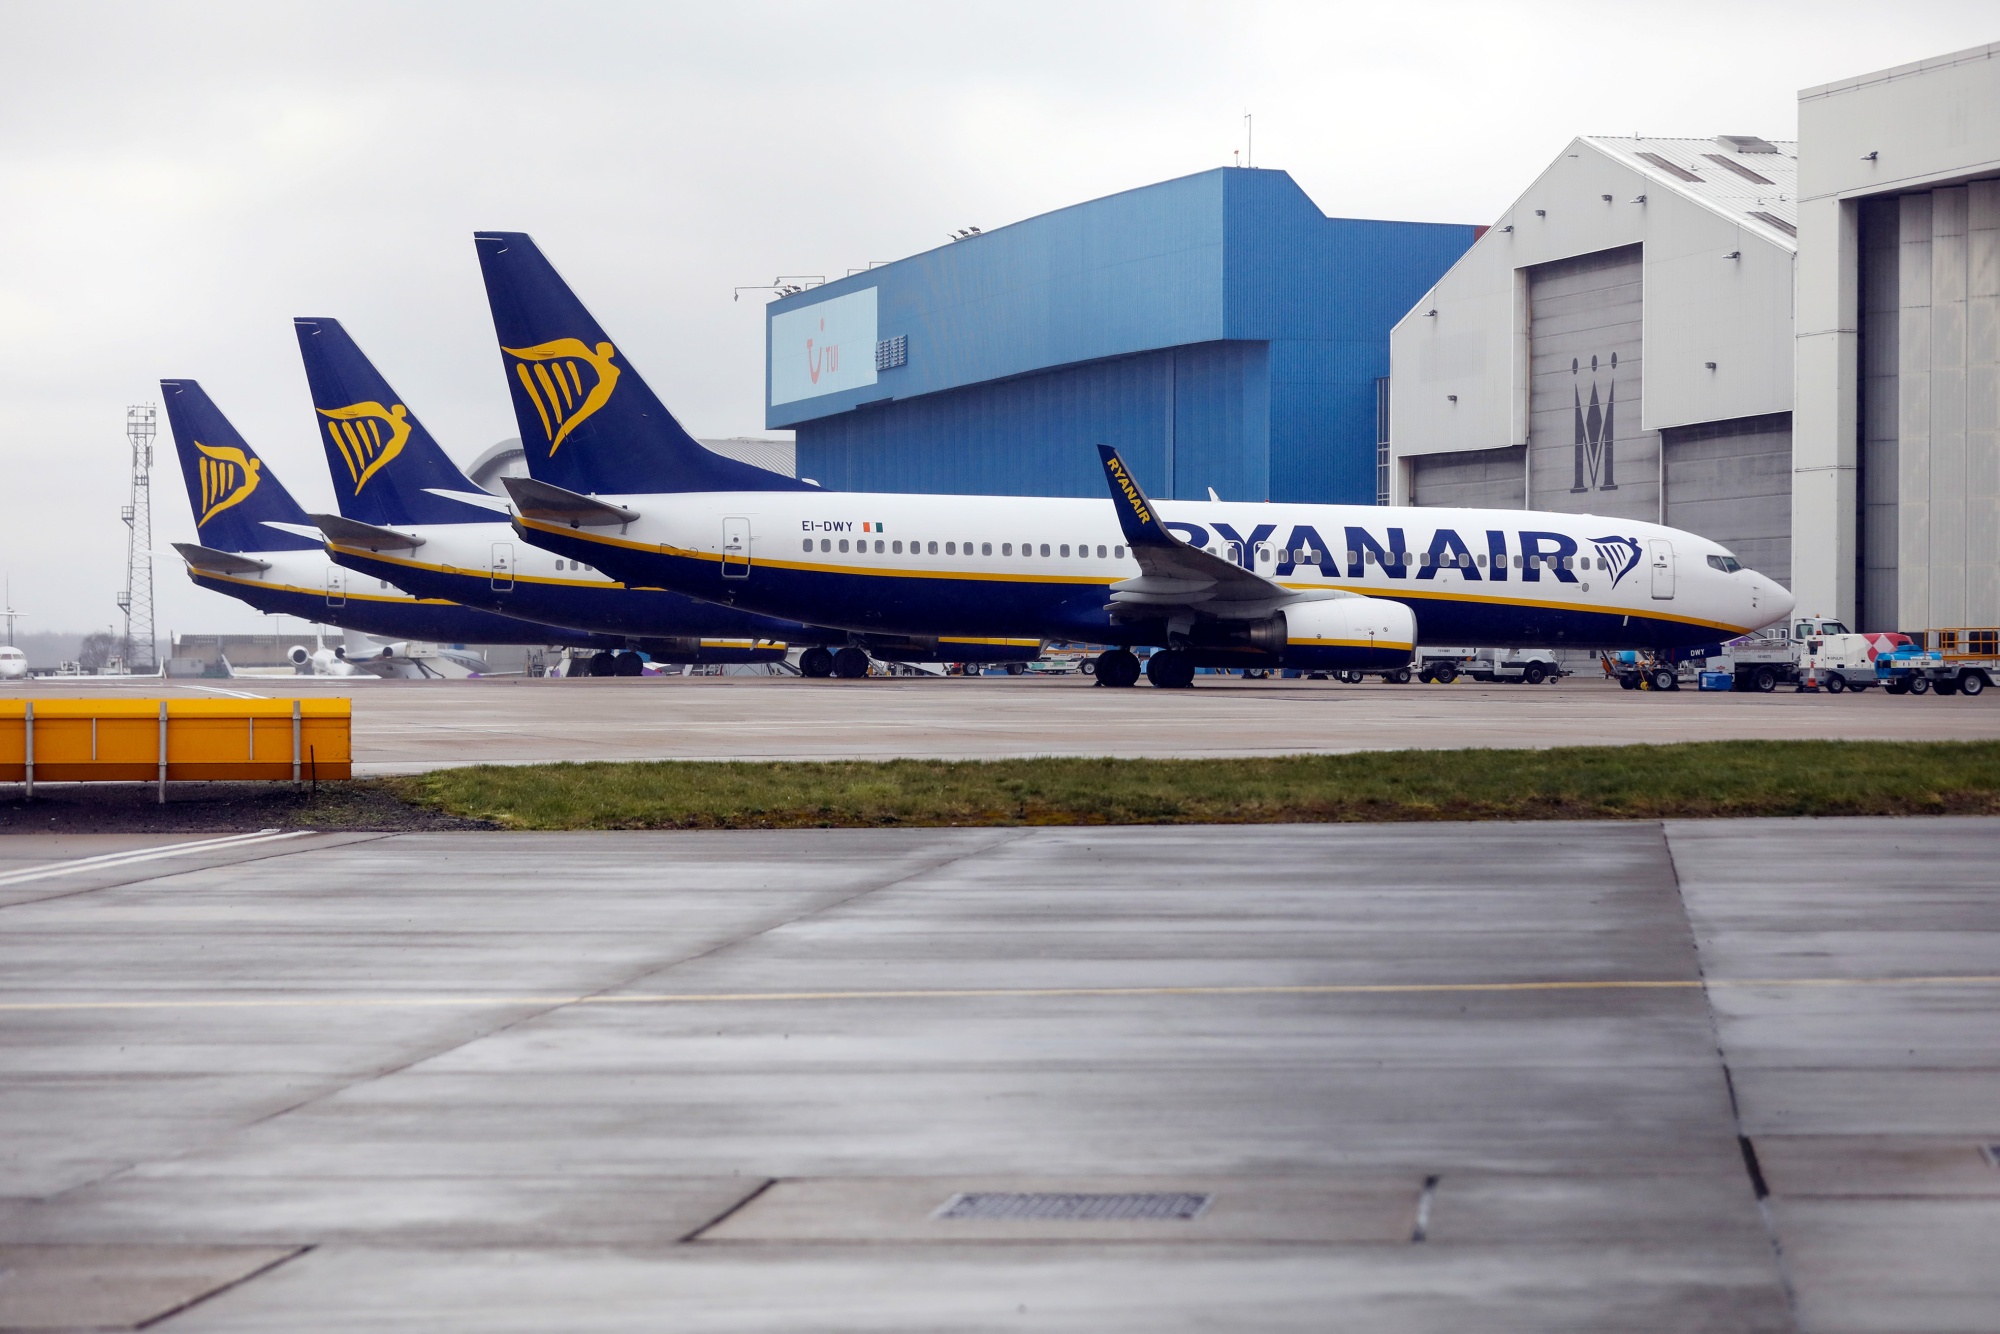 Ryanair Holdings Plc aircraft sit parked at London Luton Airport, on March 30.